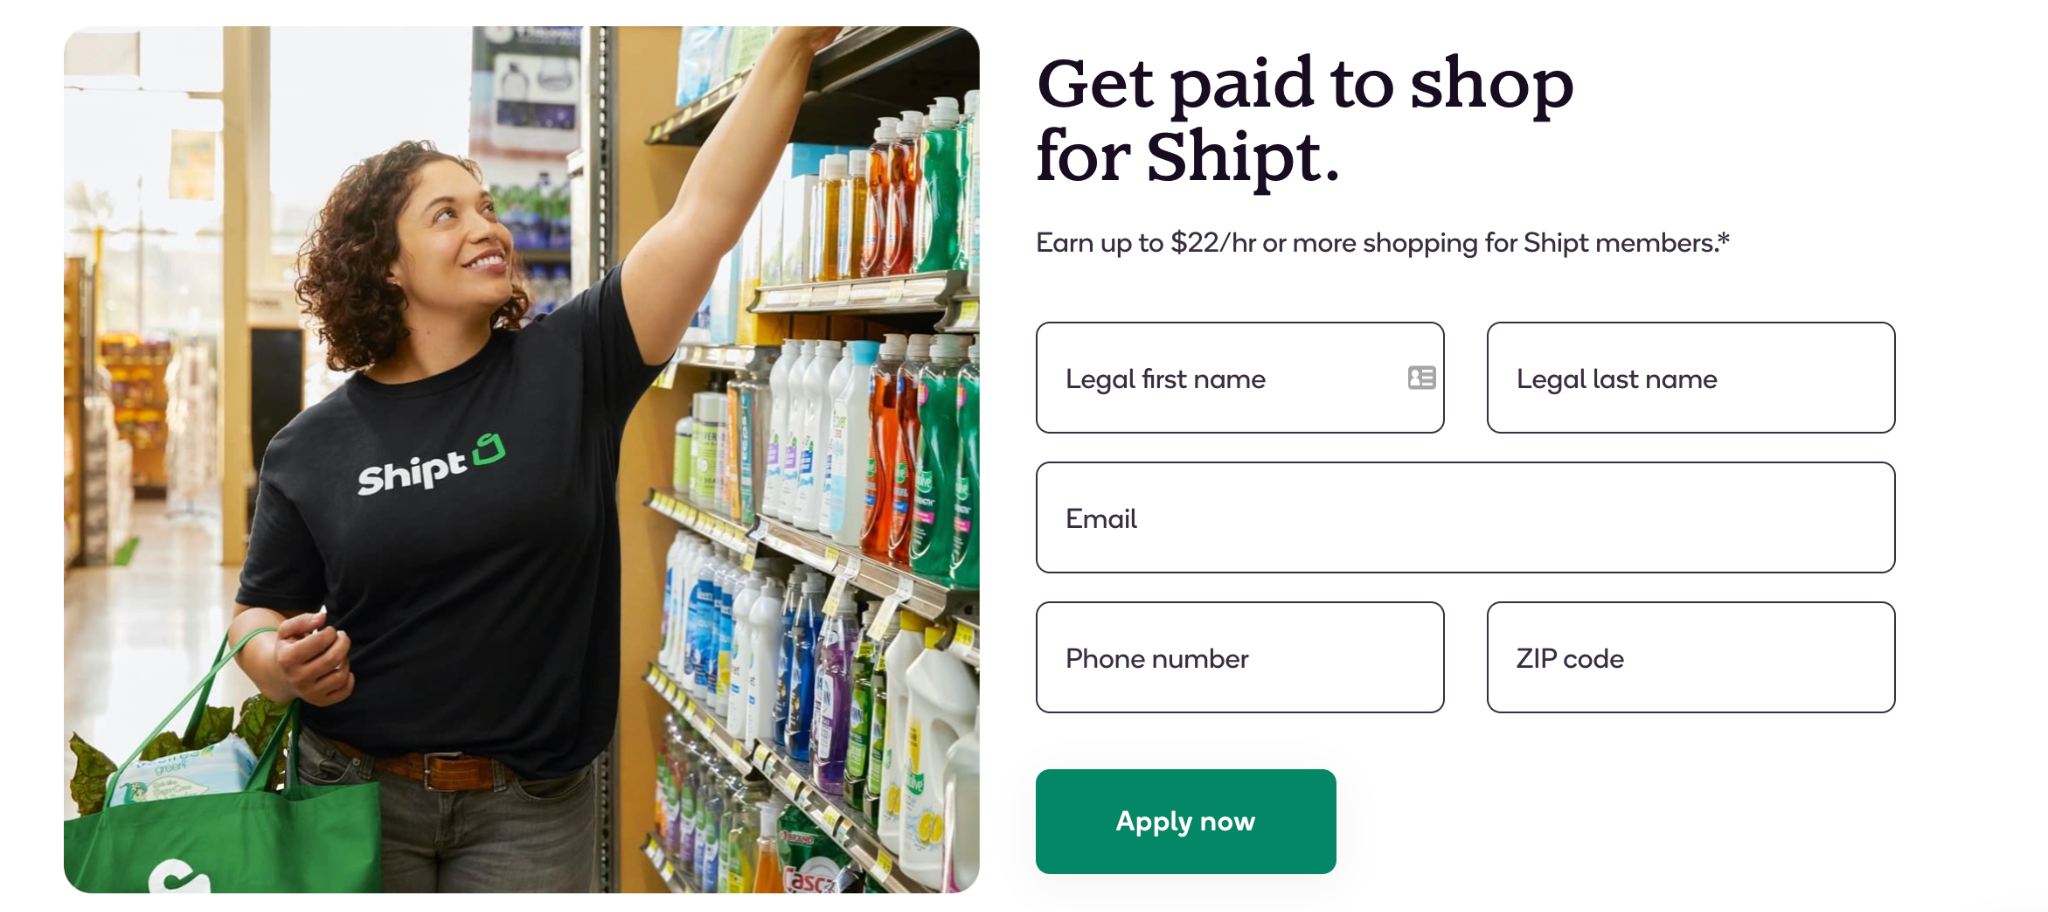 get paid to shop for Shipt